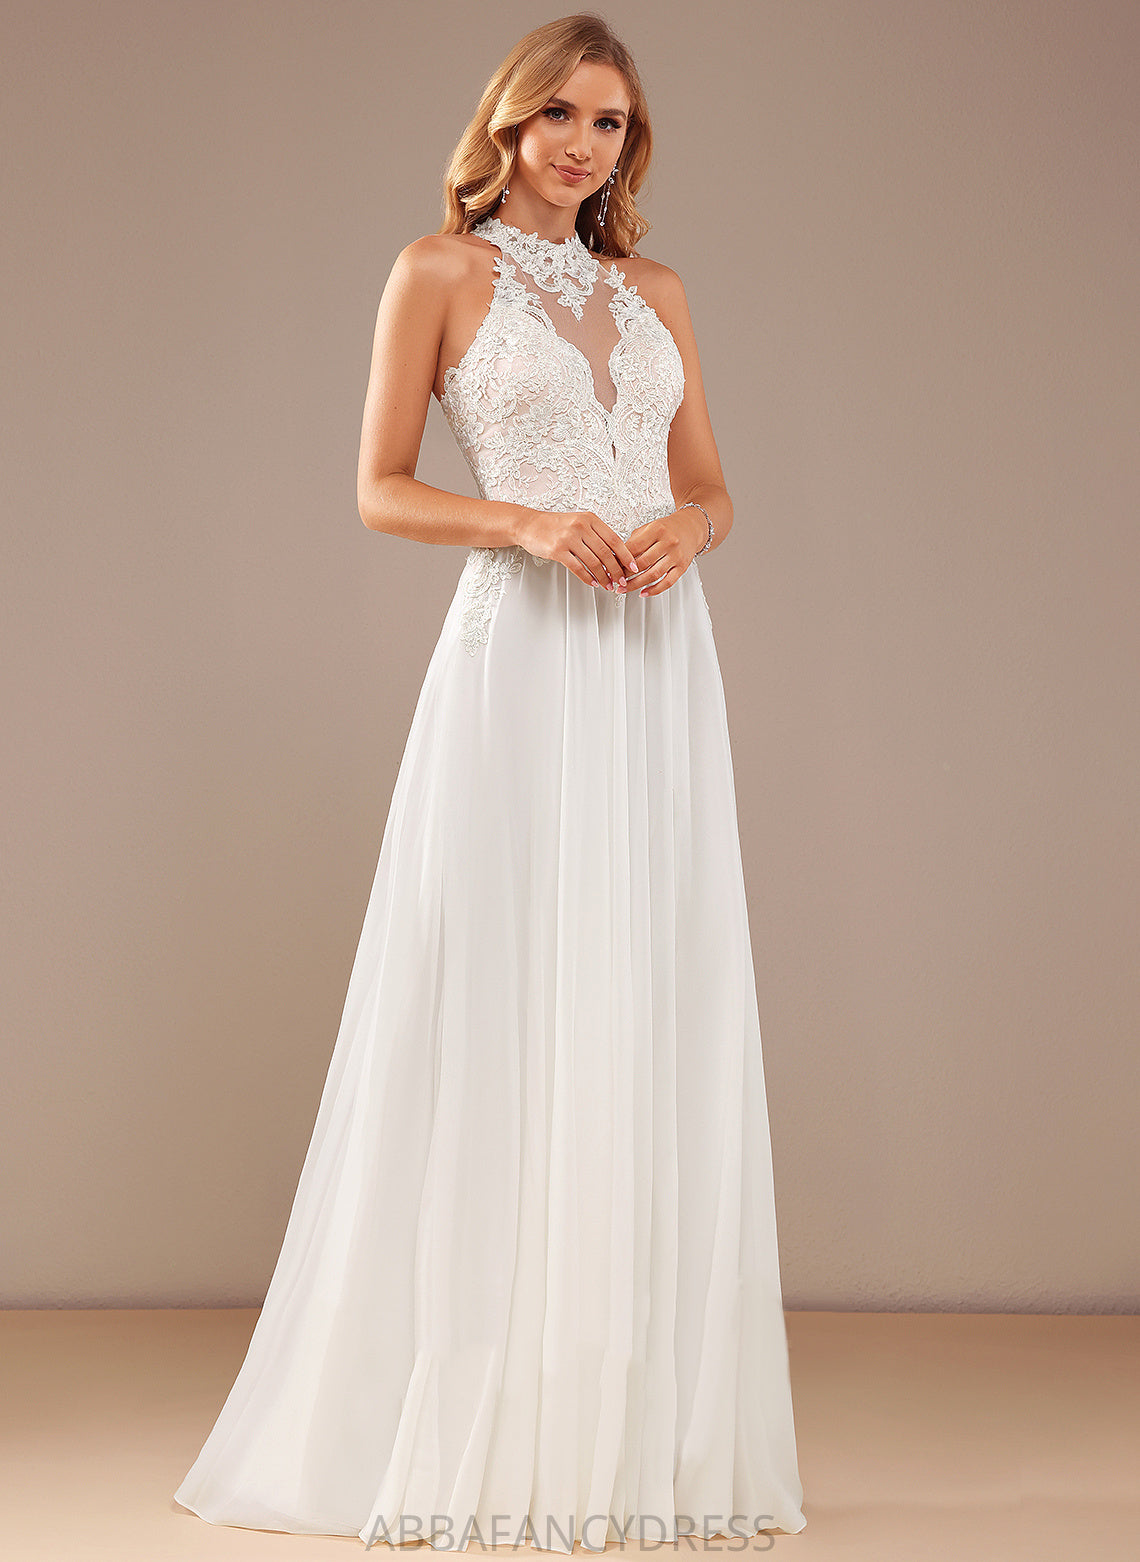 Wedding Dresses Floor-Length Wedding Chiffon High Neck Beading With Dress Sequins A-Line Lace Alisa